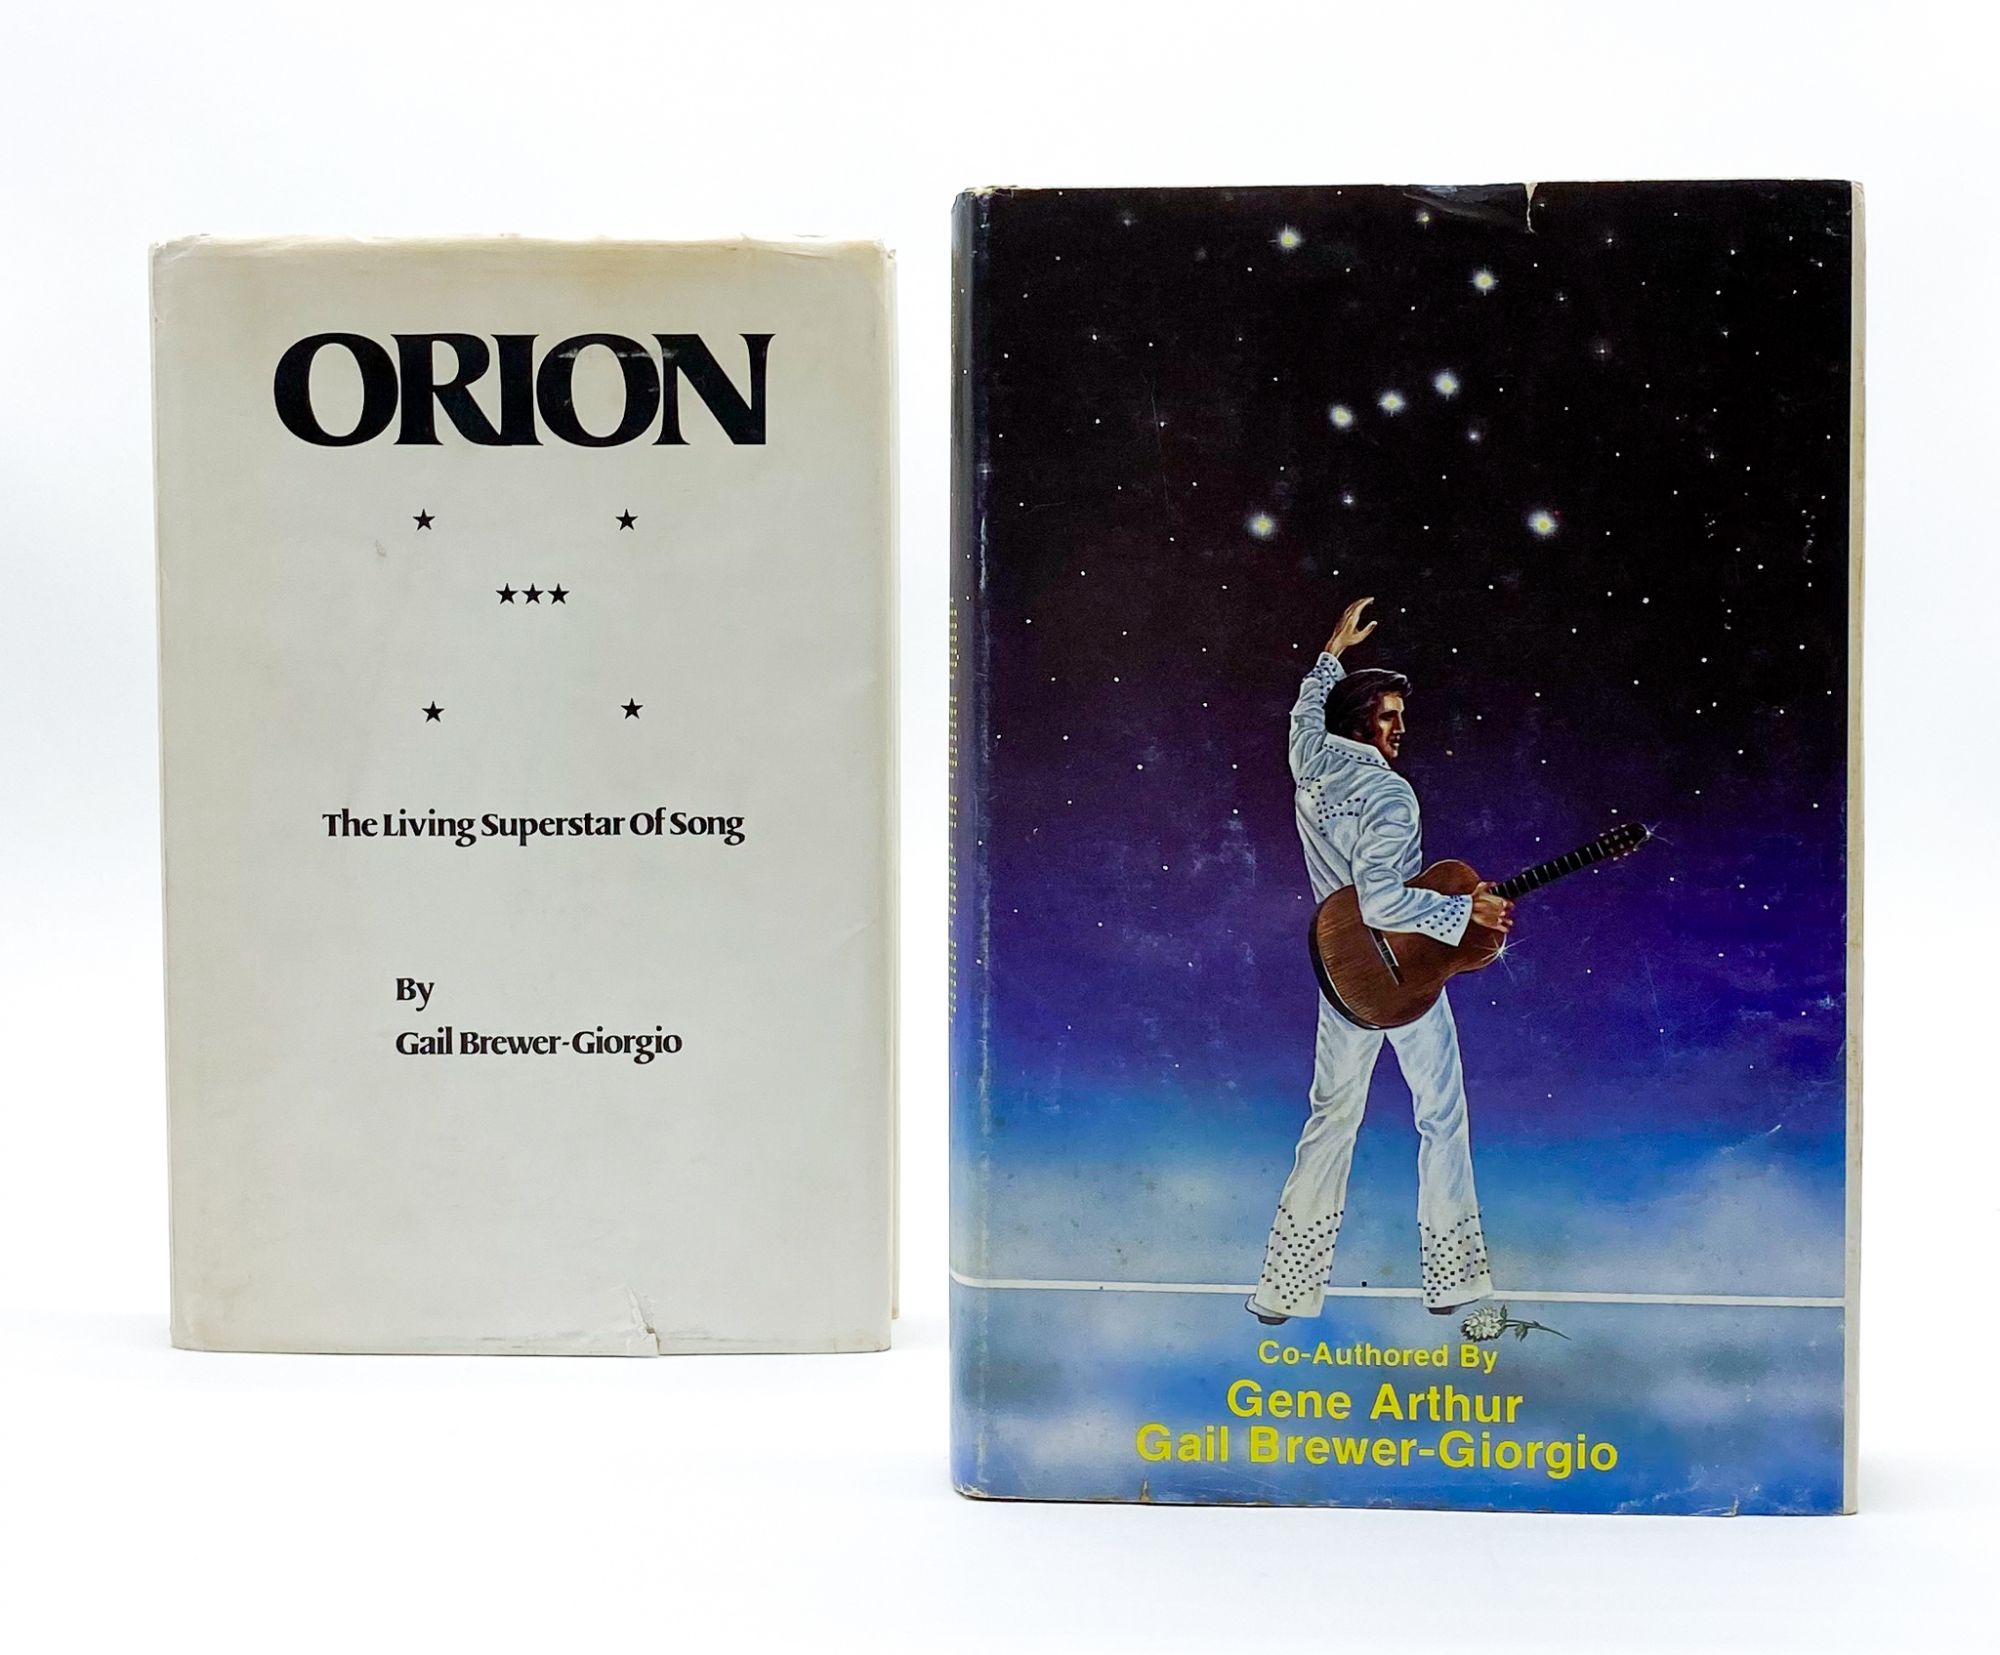 Orion: The Living Superstar of Song